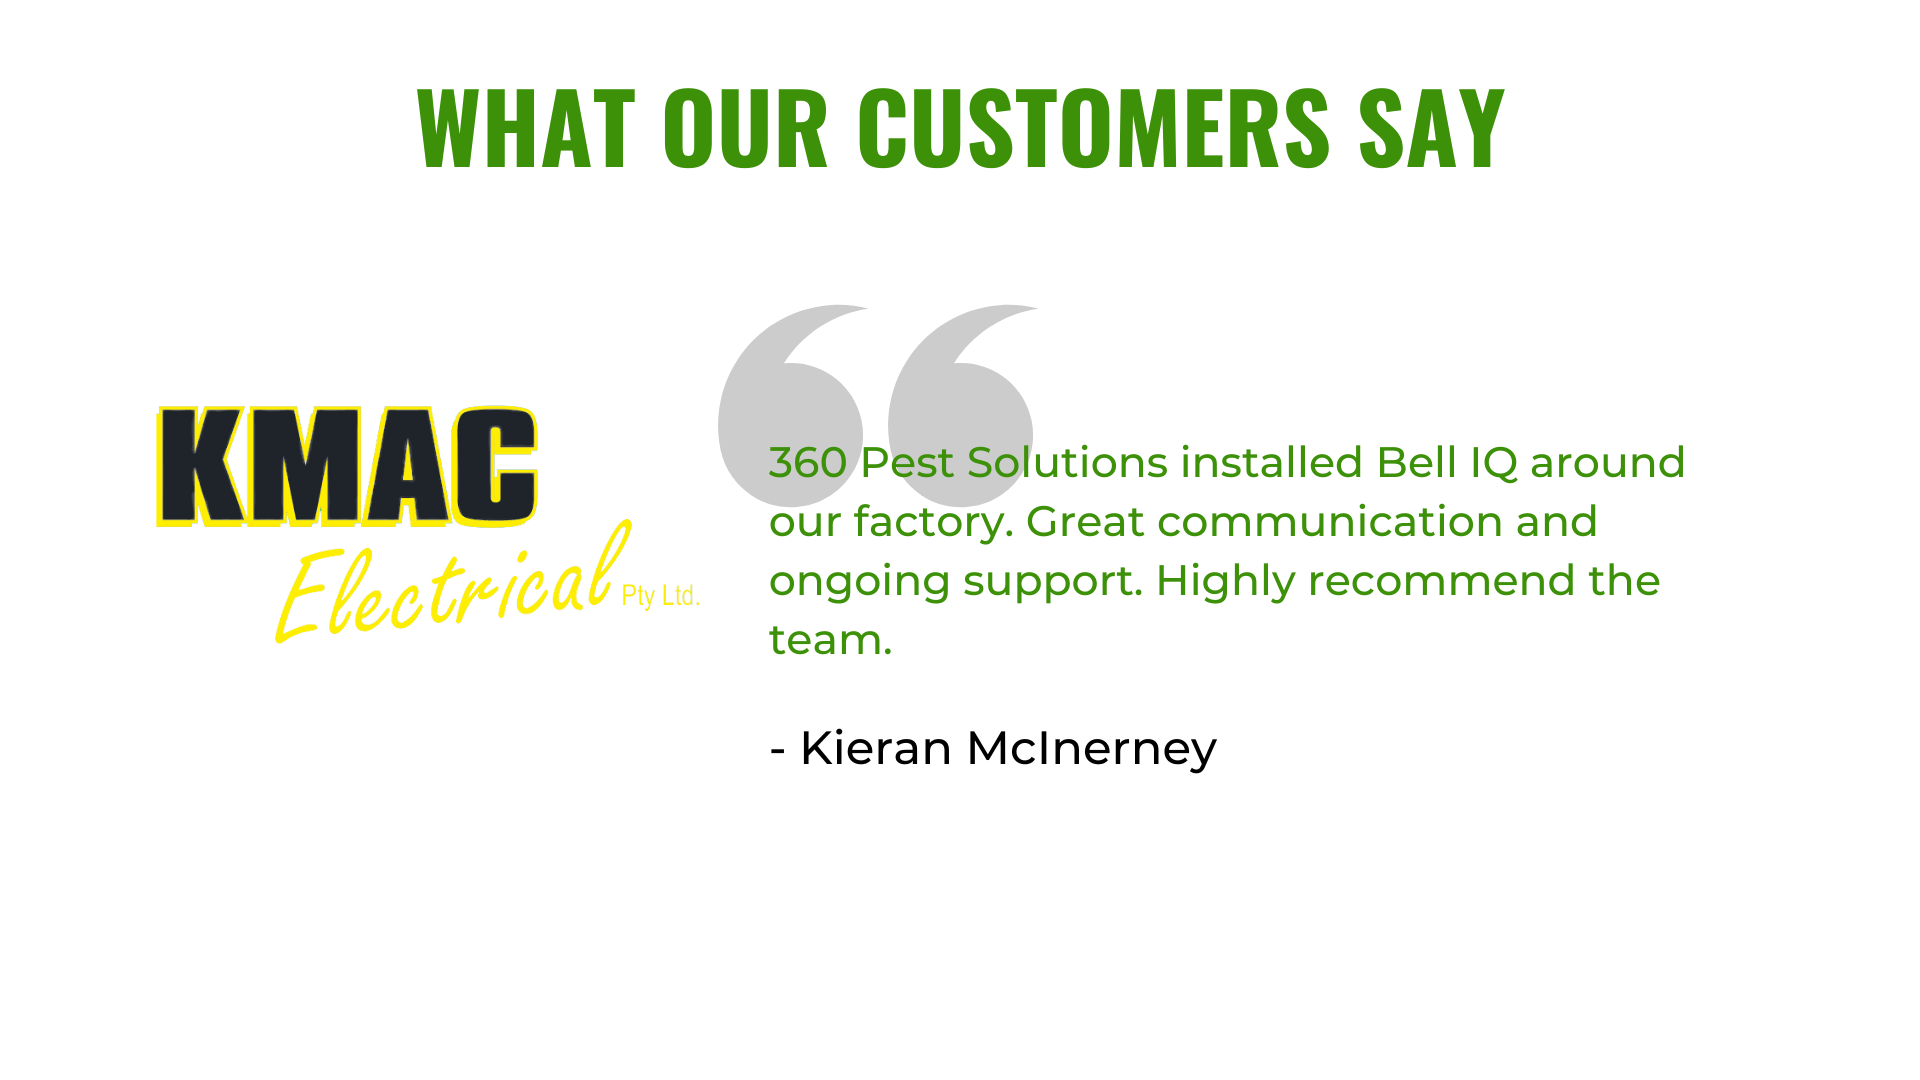 What our Customers say | 360 Pest Solutions